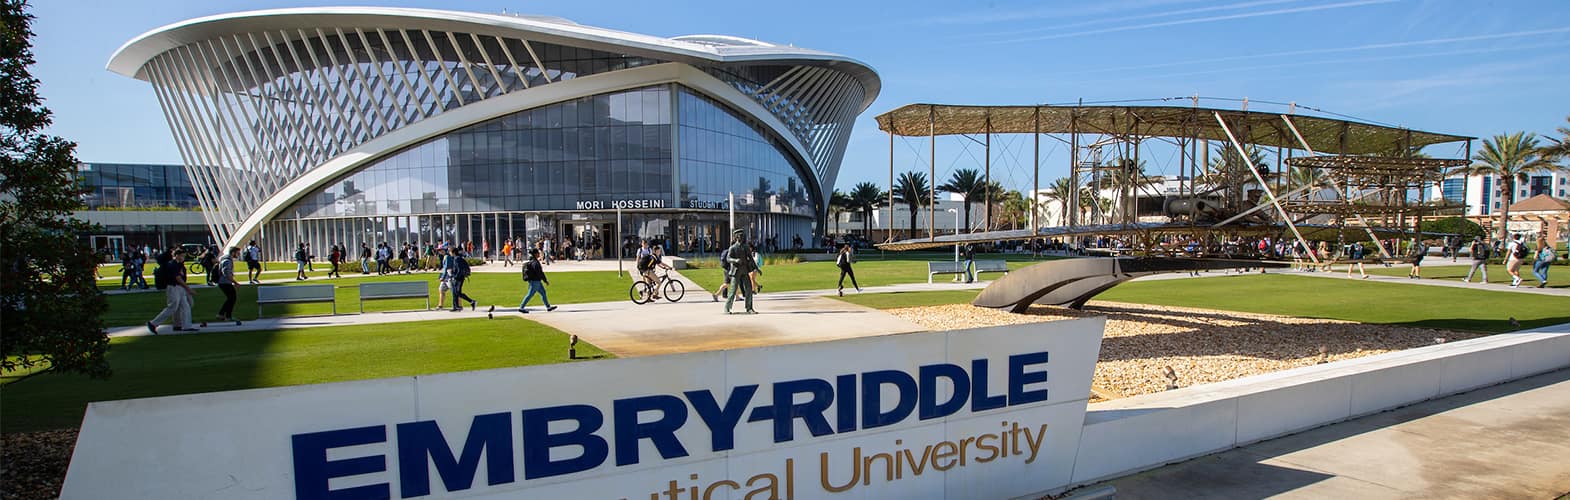 facilities-technology-embry-riddle-aeronautical-university-giving-to